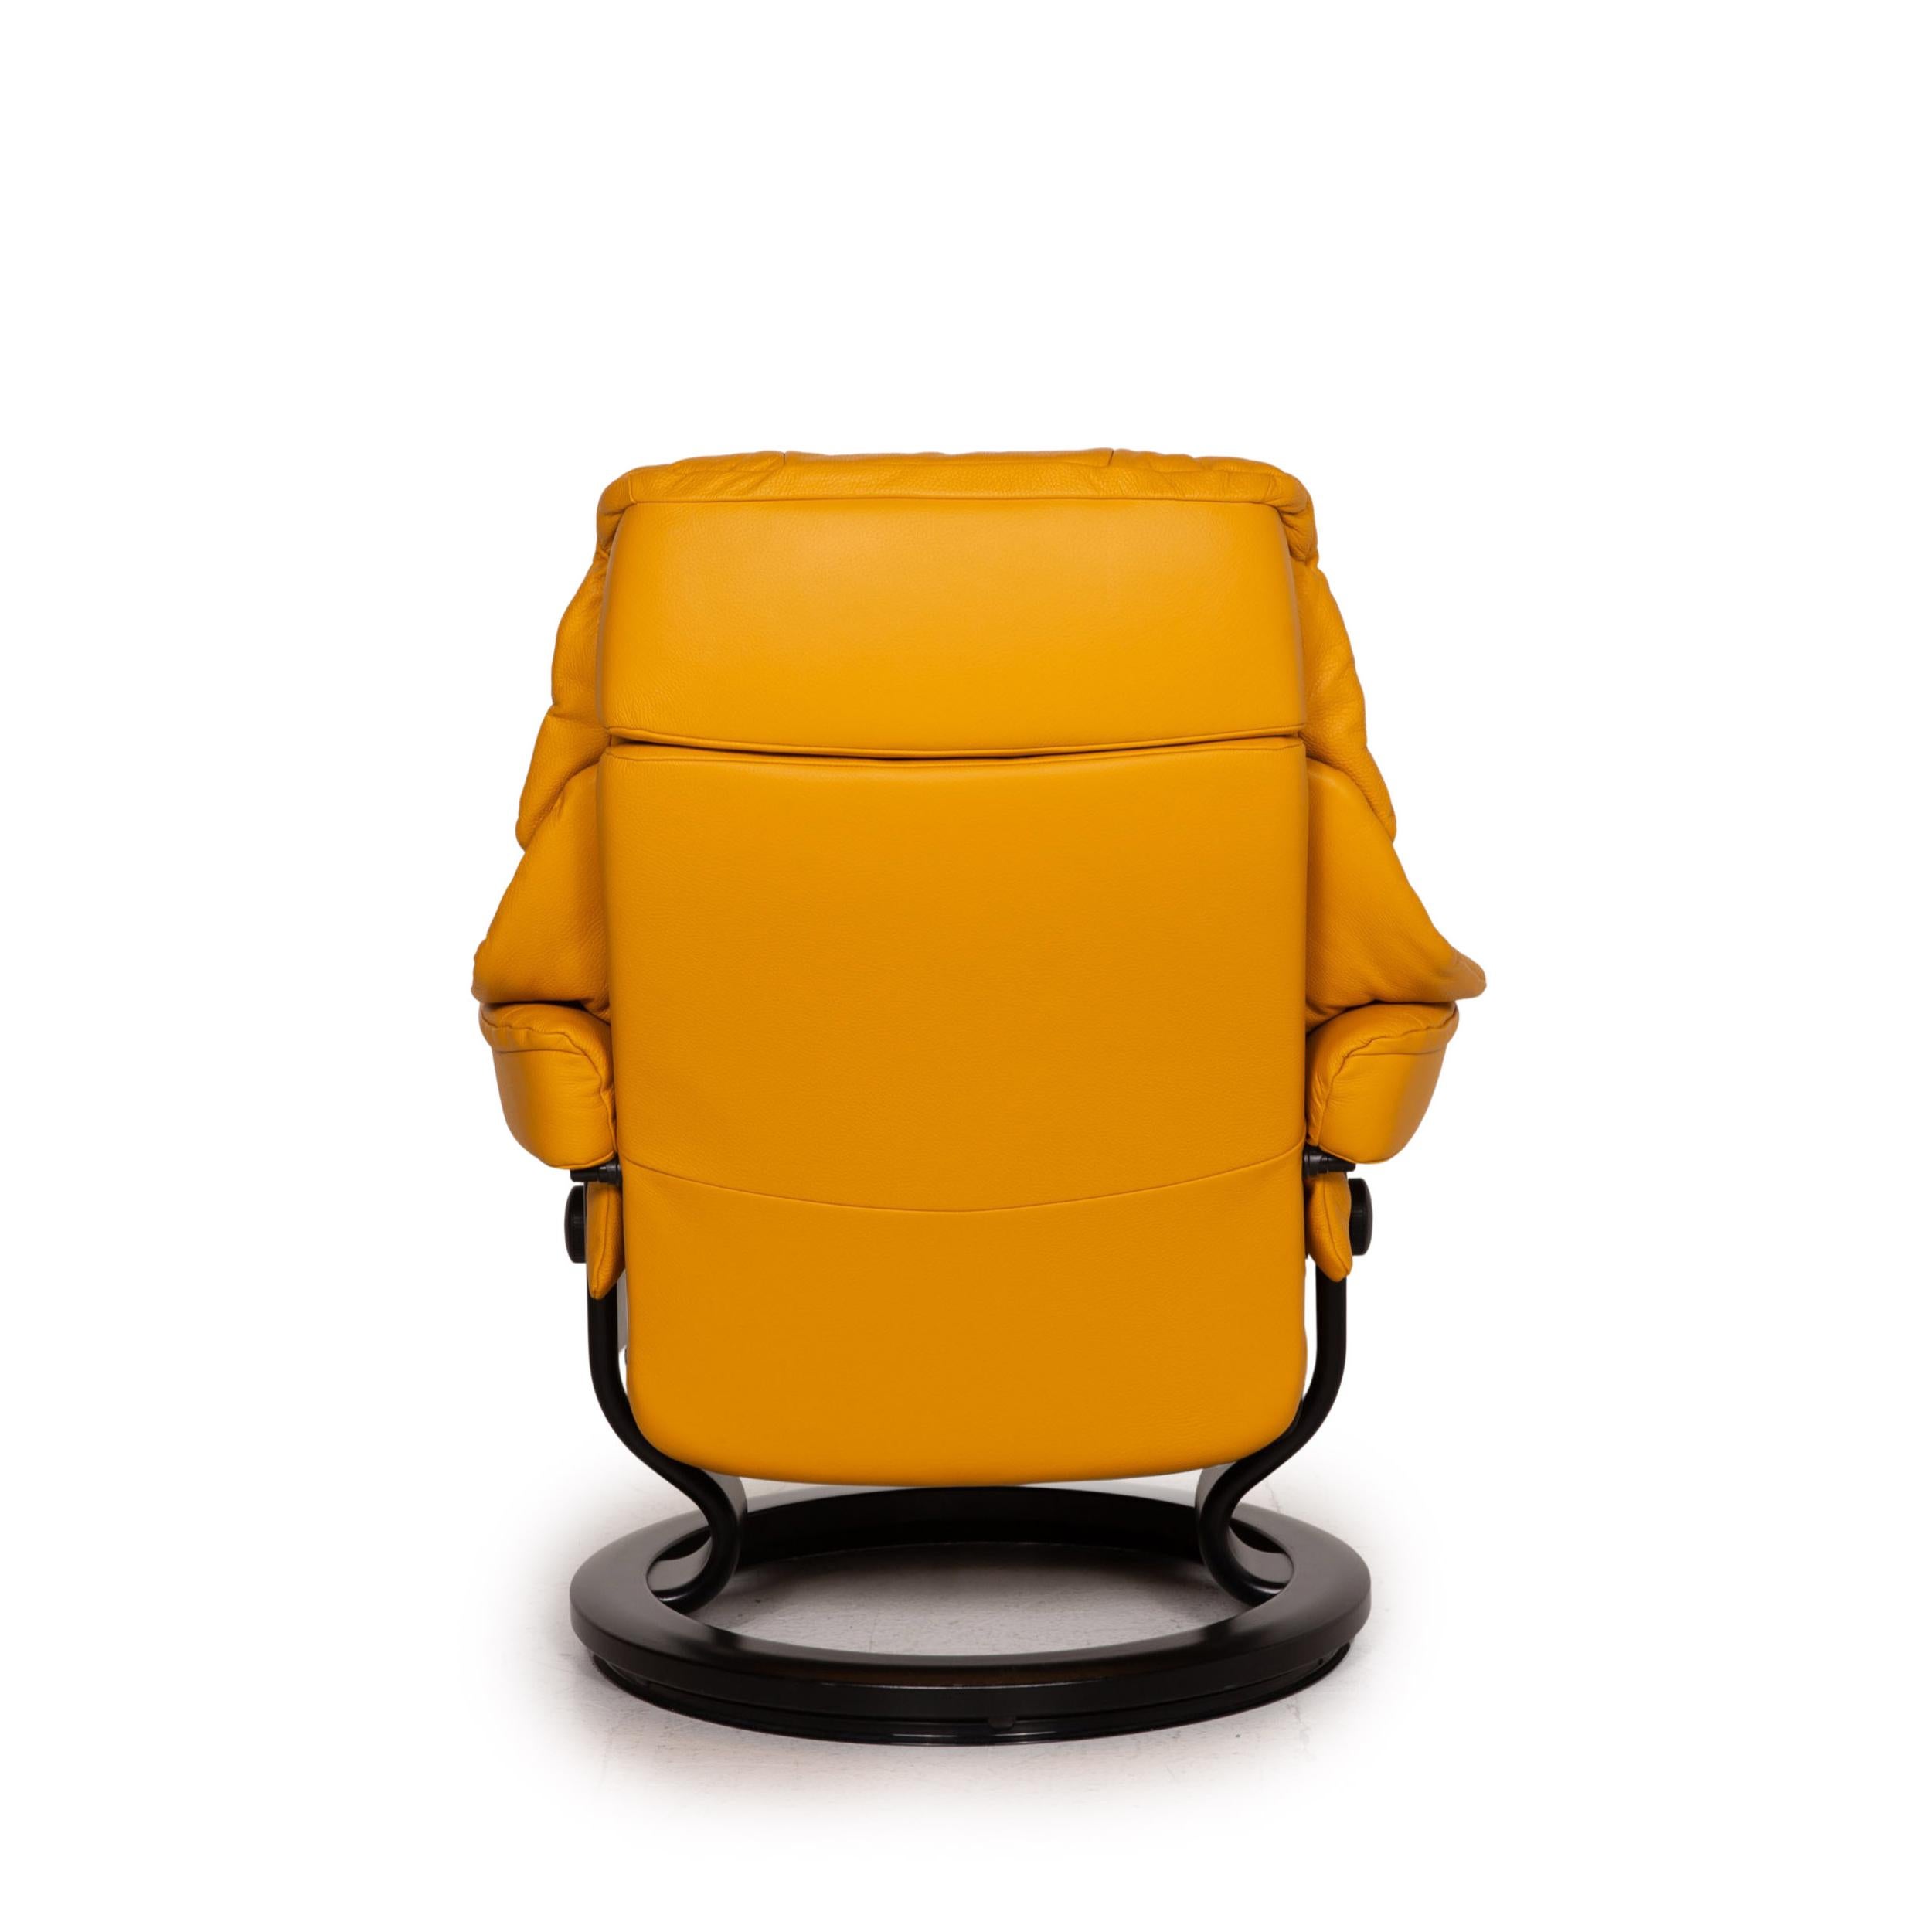 Stressless Reno Leather Recliner Yellow Armchair 3